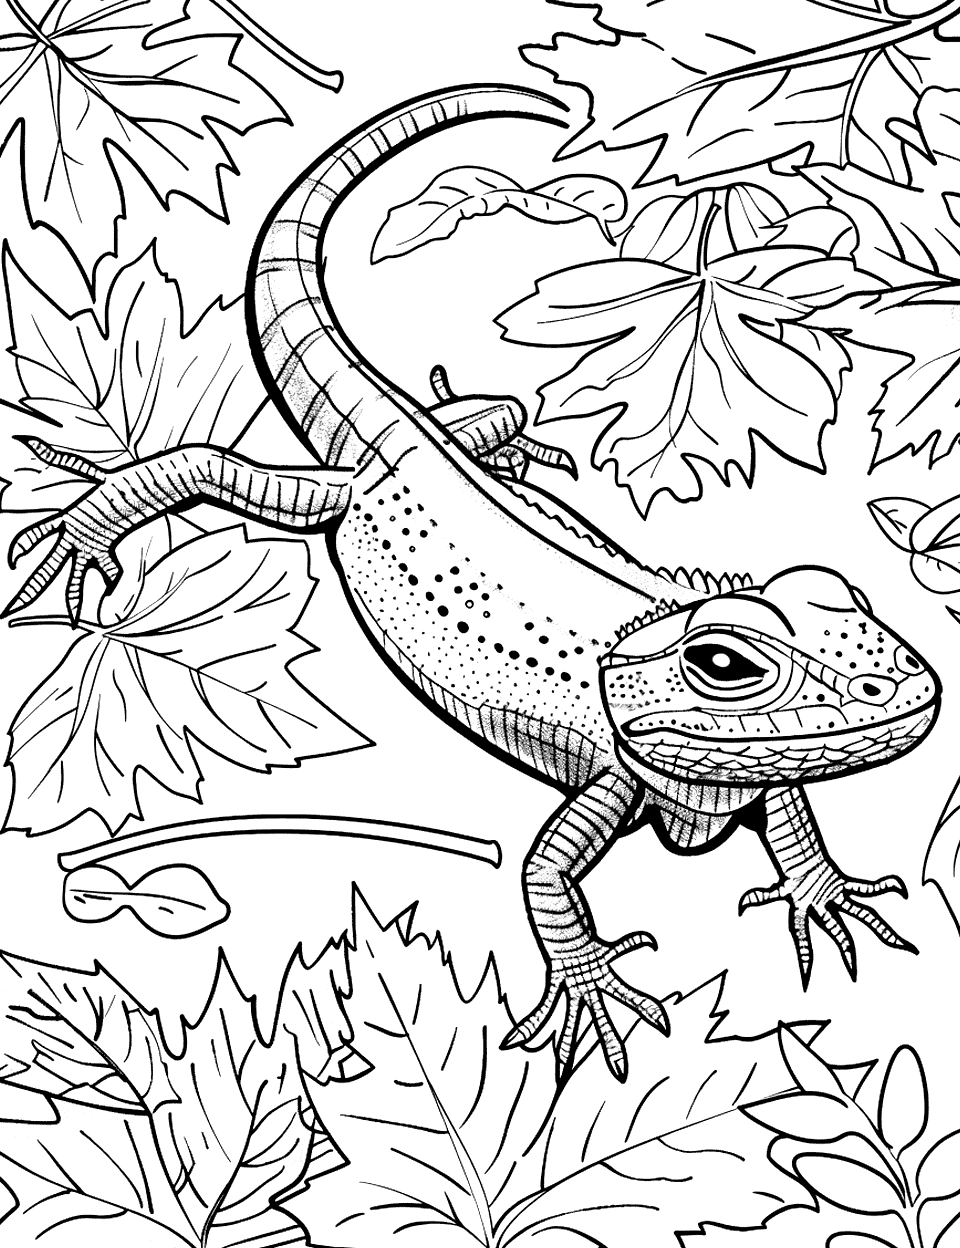 Alligator Lizard Among Leaves Coloring Page - An alligator lizard camouflaged among fallen leaves on a forest floor.